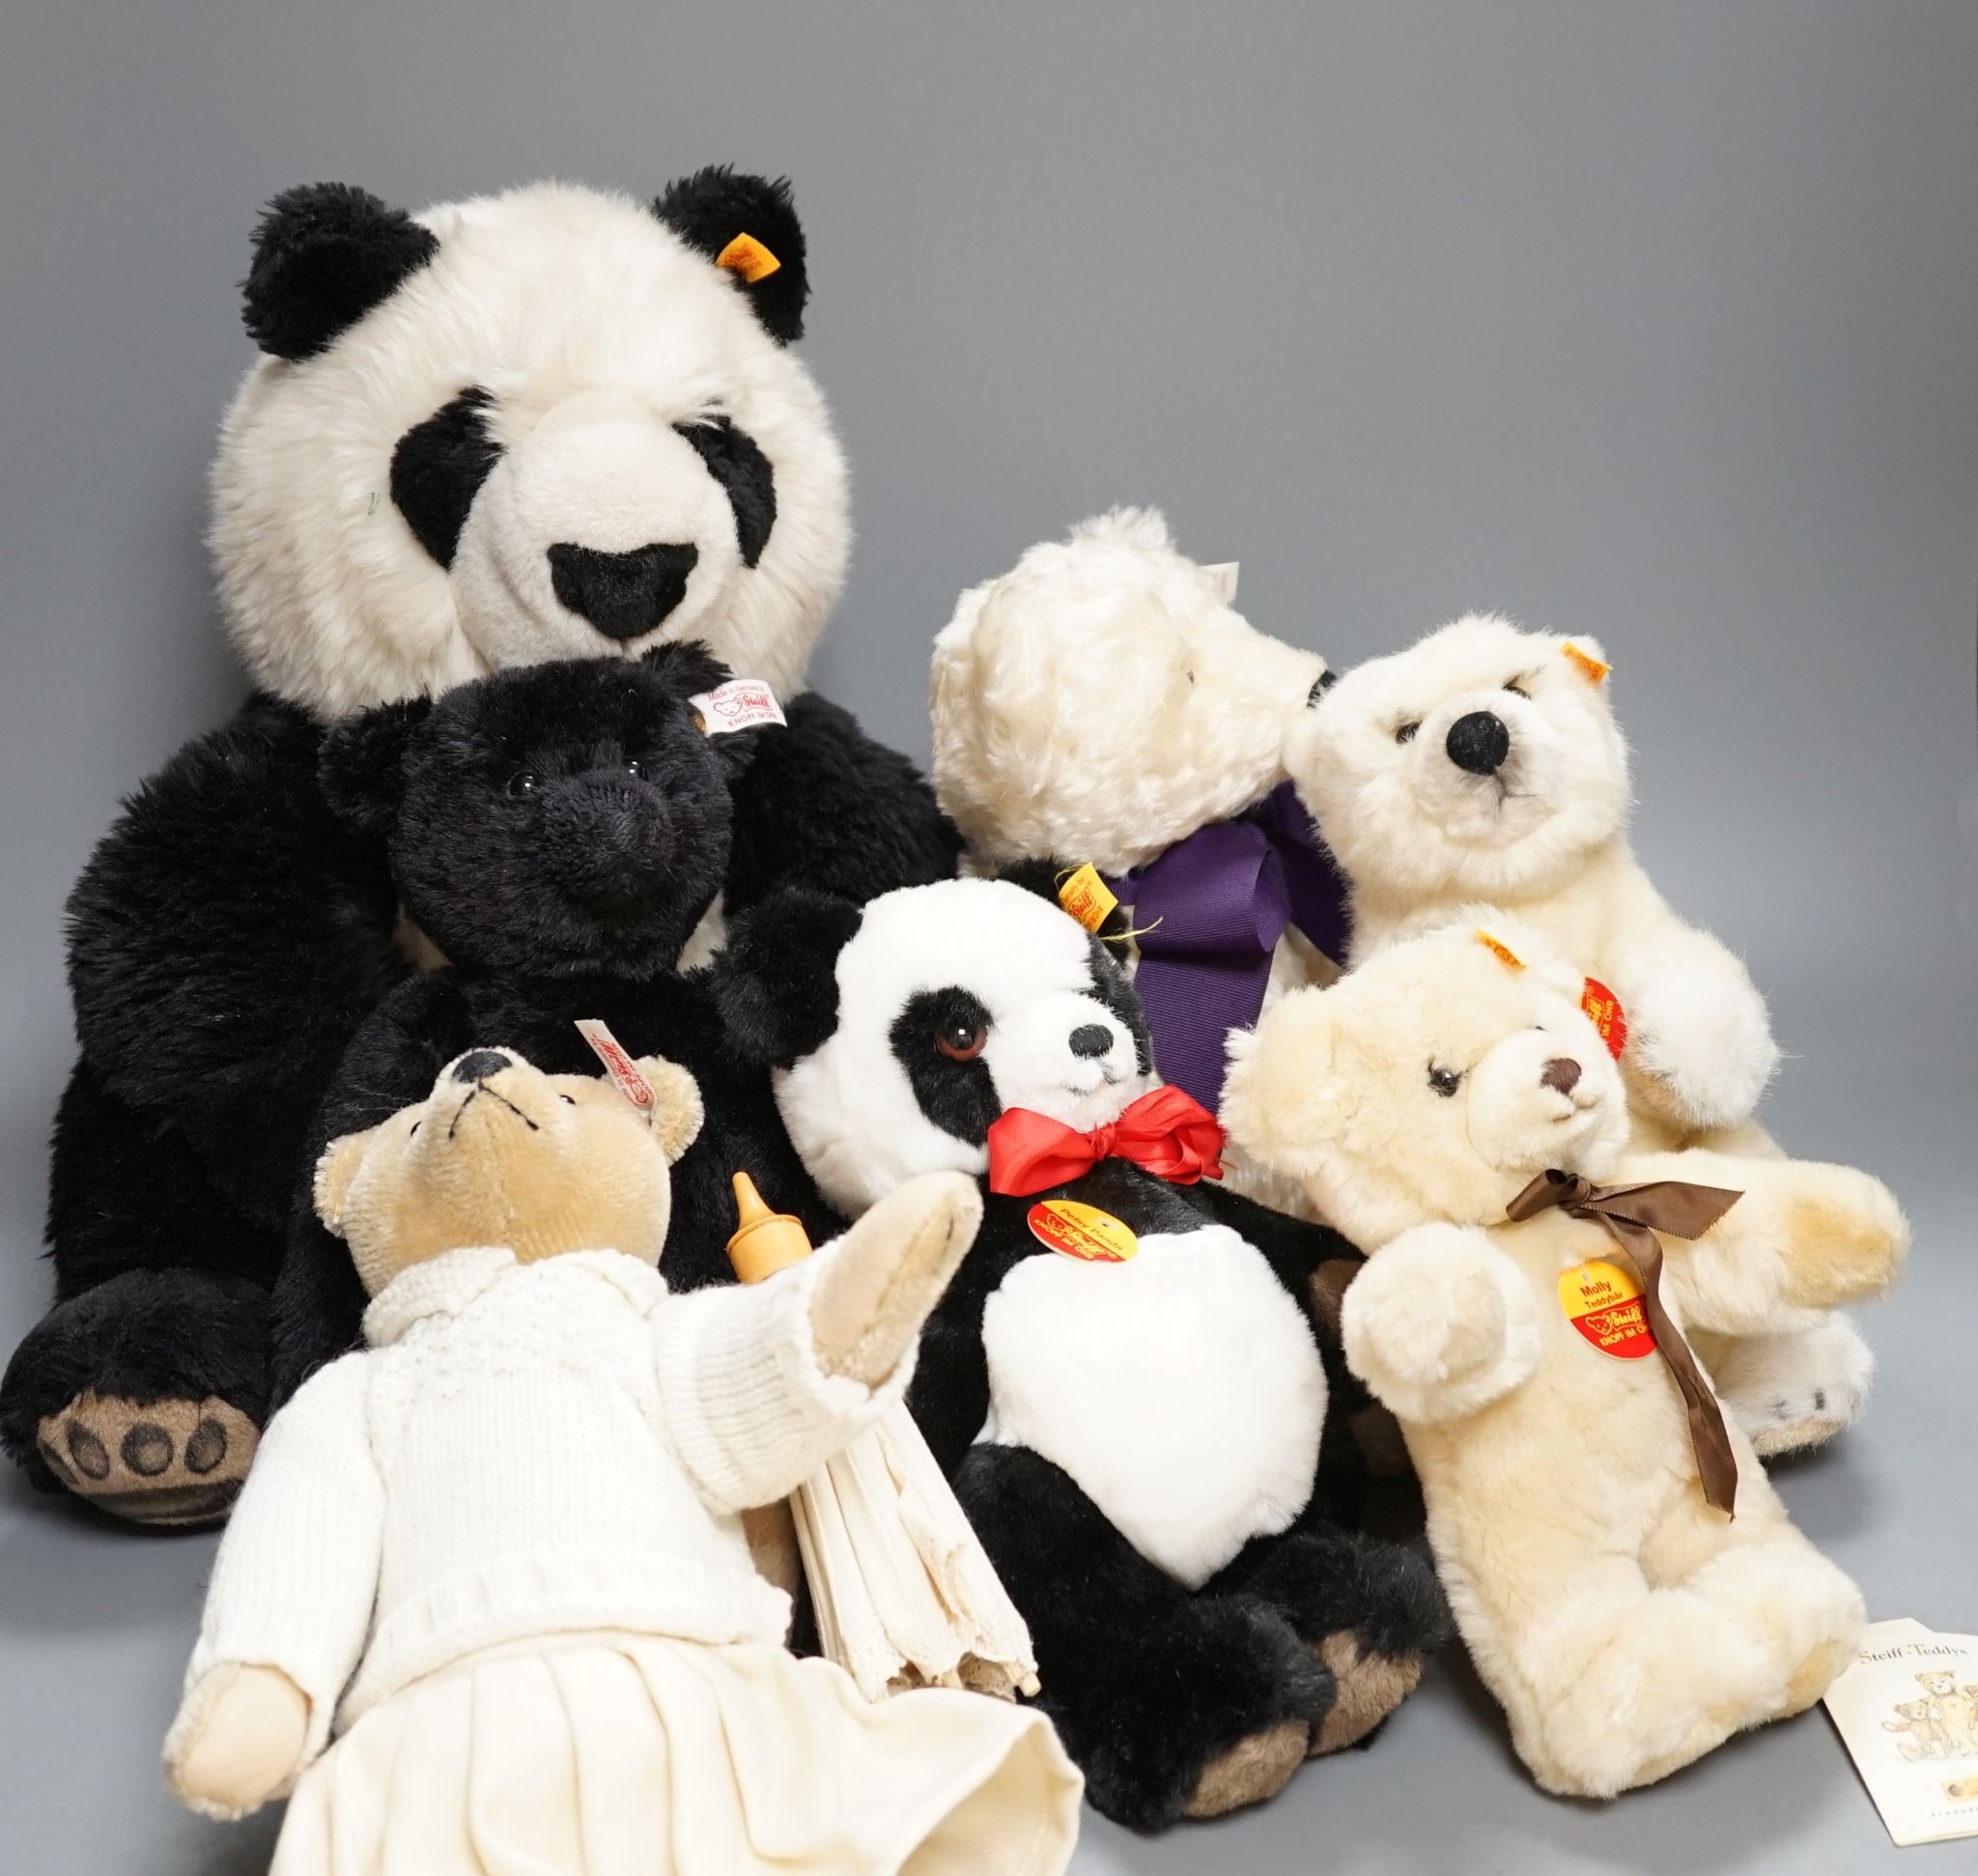 Four post war Steiff animals with a 'Pat and Nora' Limited Edition Steiff with parasol but no box and a white Limited Edition Steiff bear with white label for Hamleys